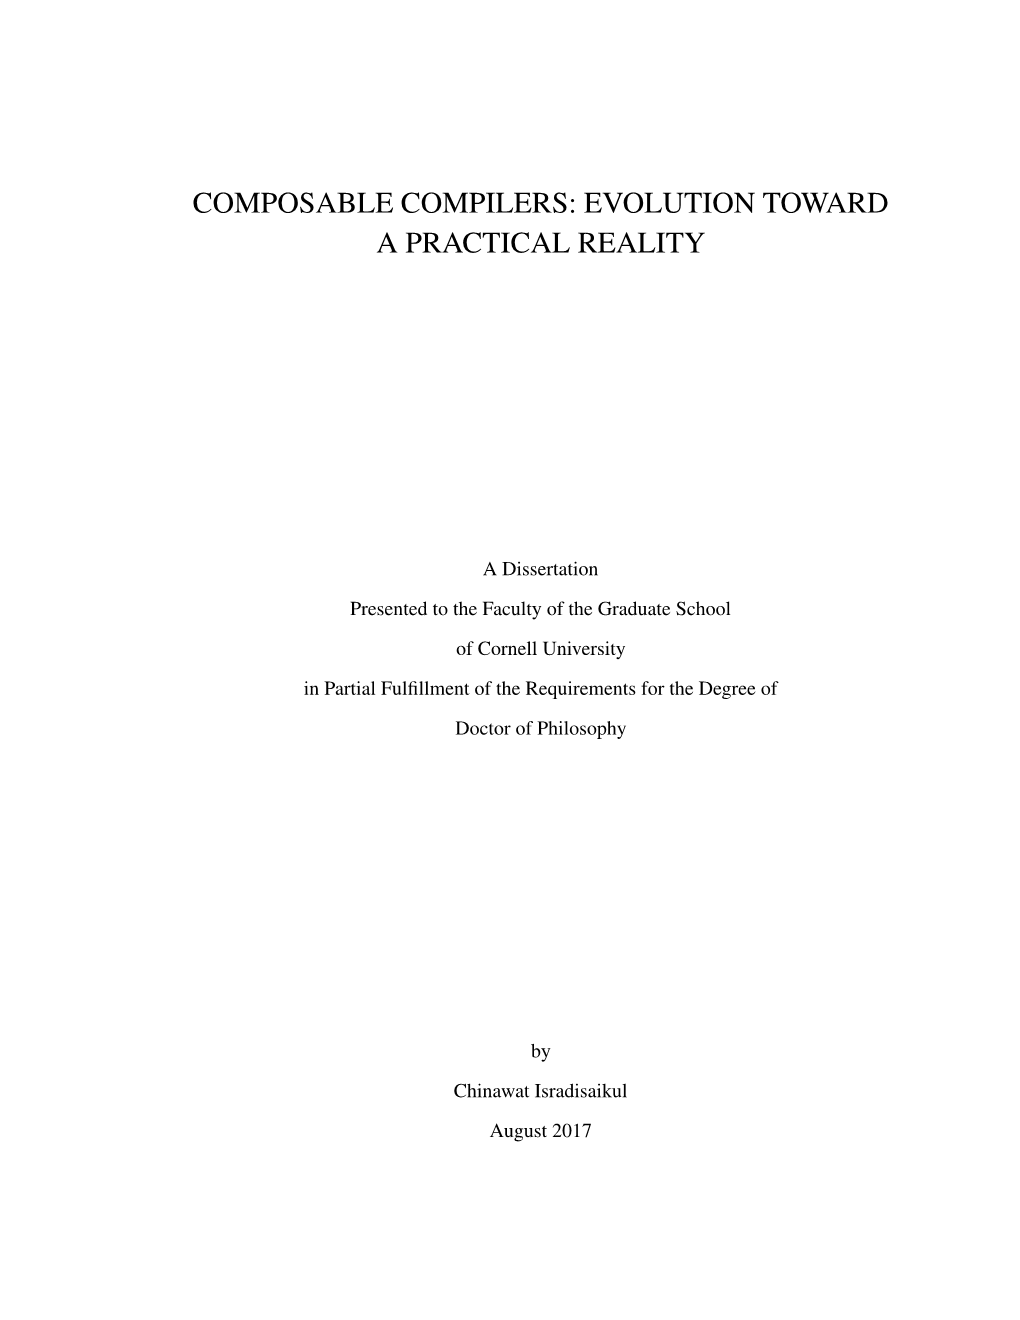 Composable Compilers: Evolution Toward a Practical Reality